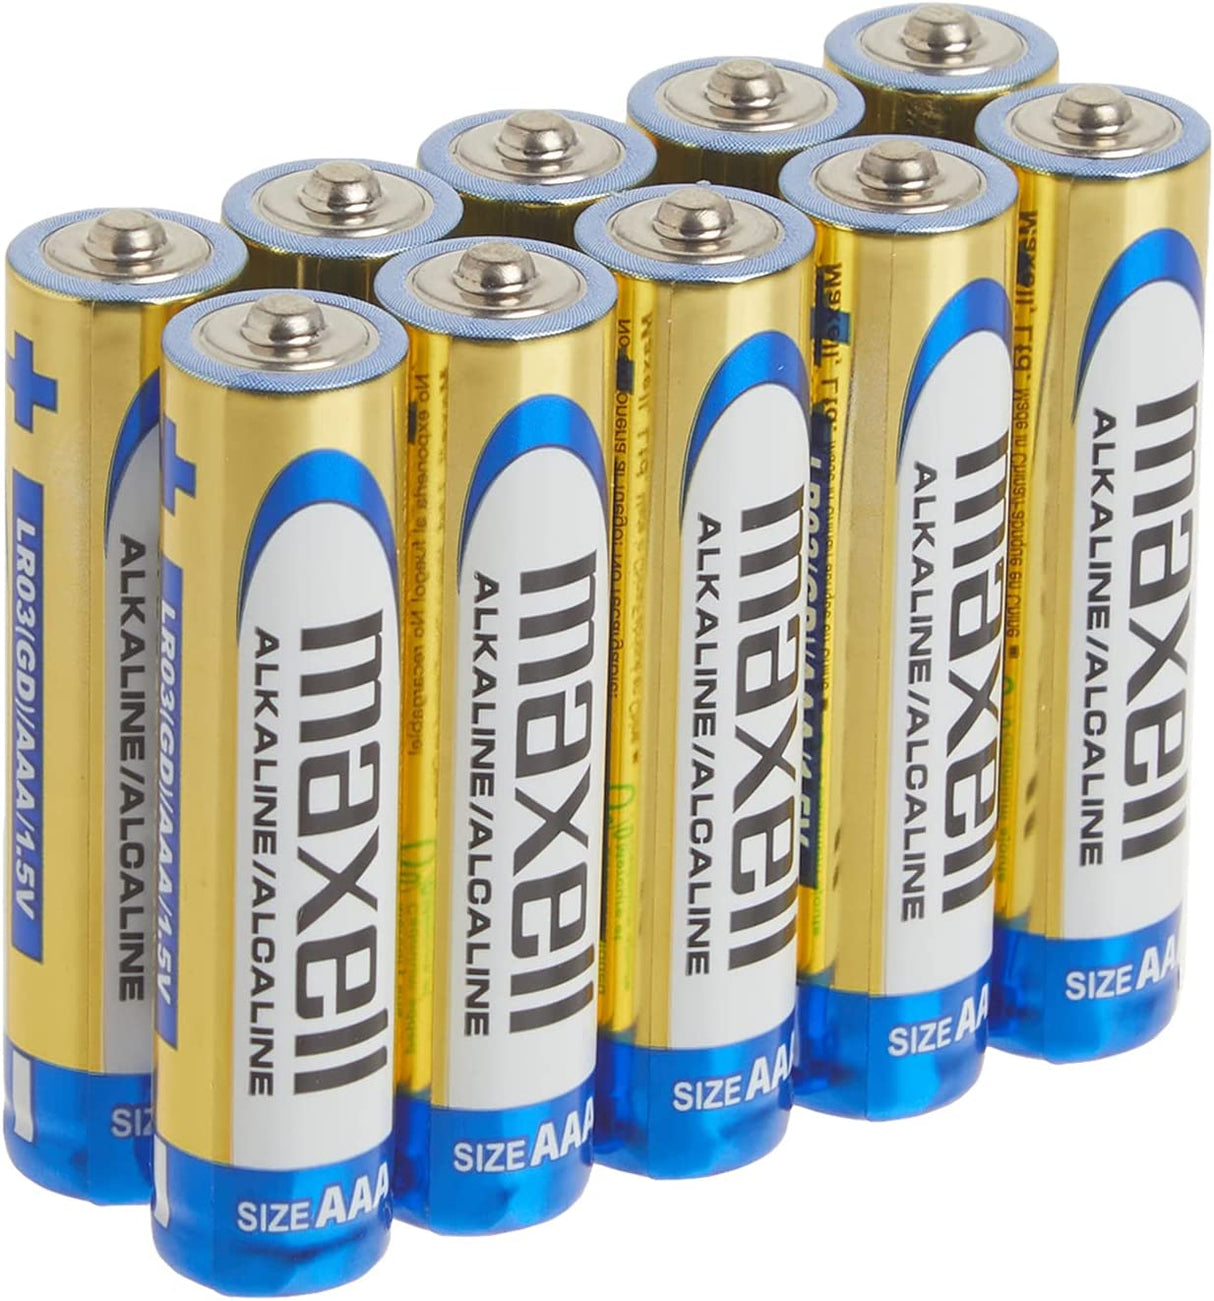 Maxell 723810 Ready-to-go Long Lasting and Reliable Alkaline Battery AAA Cell 10-Pack